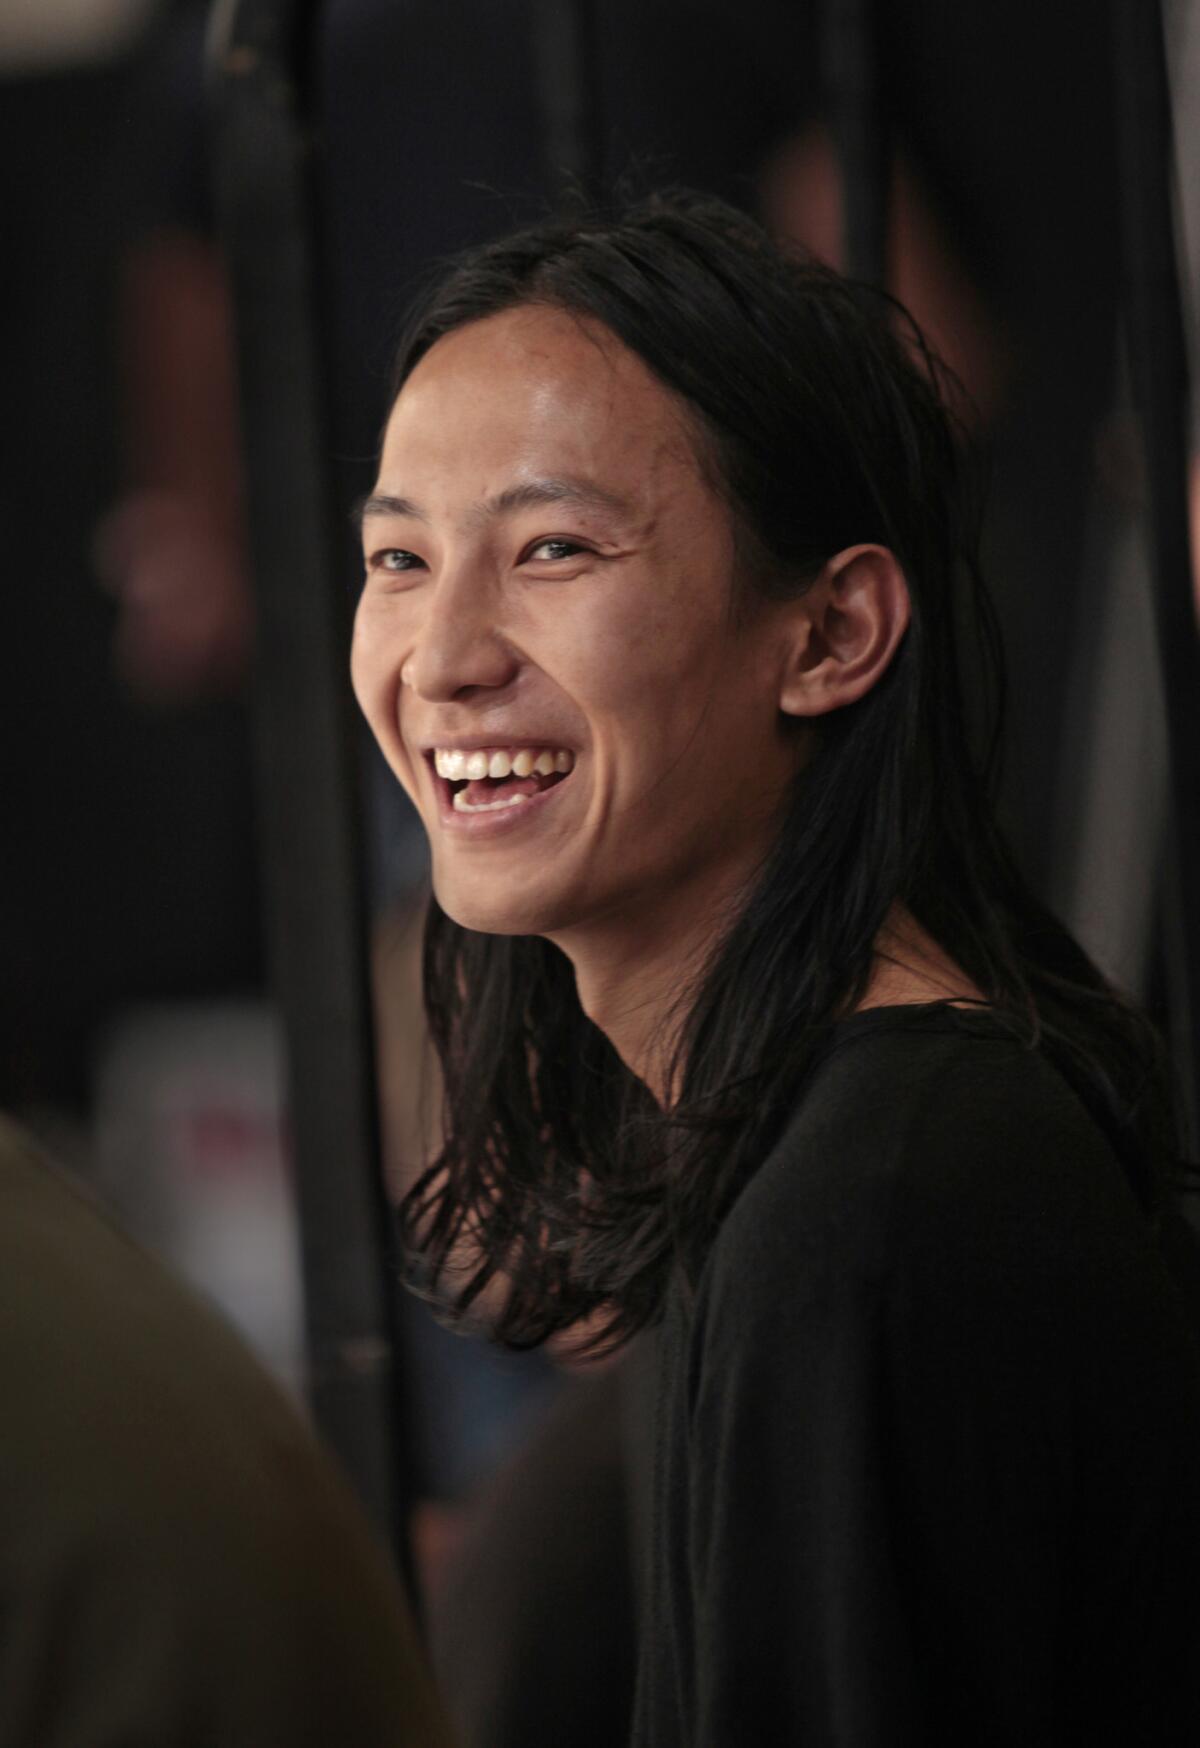 Fashion designer Alexander Wang will be showing his collection in Brooklyn, away from the Lincoln Center hub of New York Fashion Week activities.